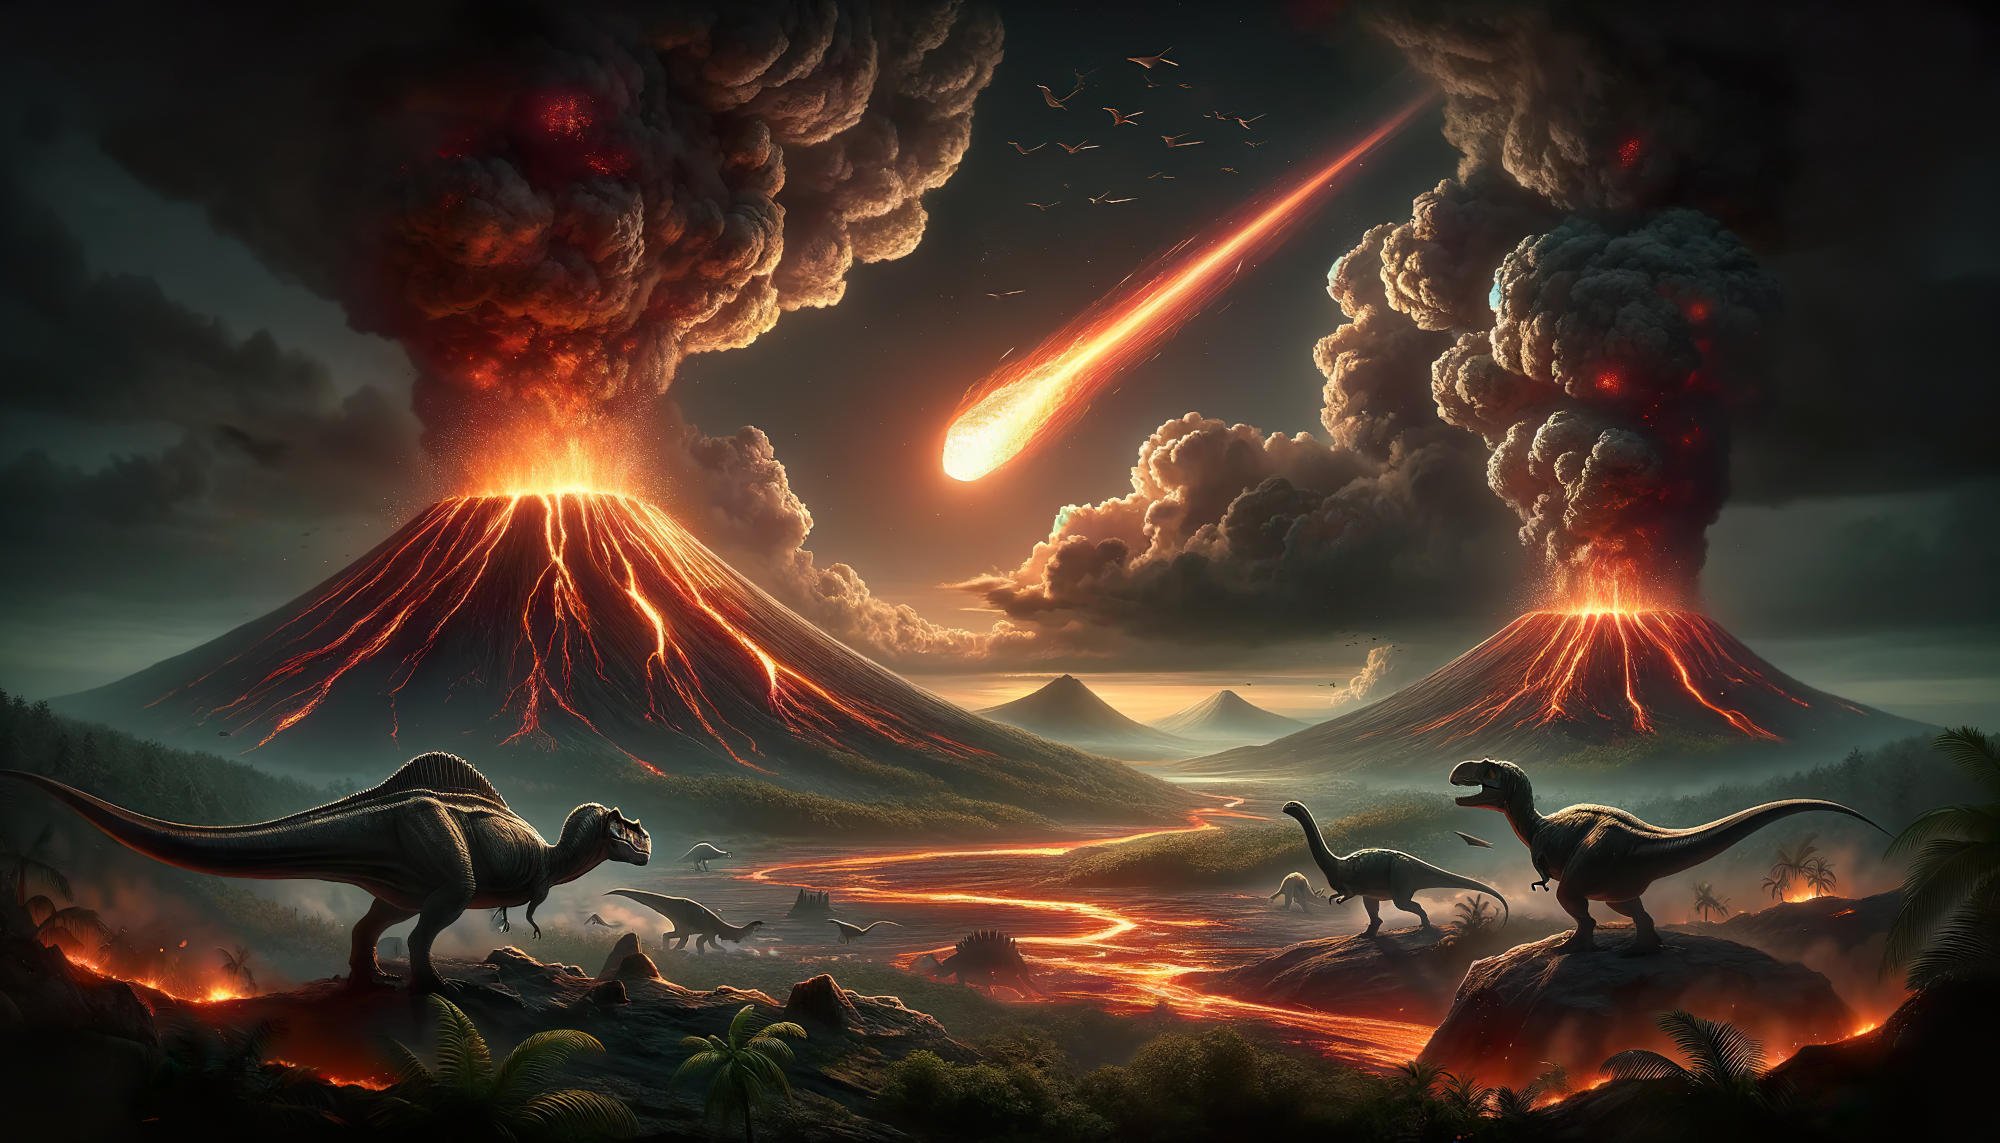 Volcano or asteroid?  Artificial intelligence ends the controversy over the dinosaur extinction event